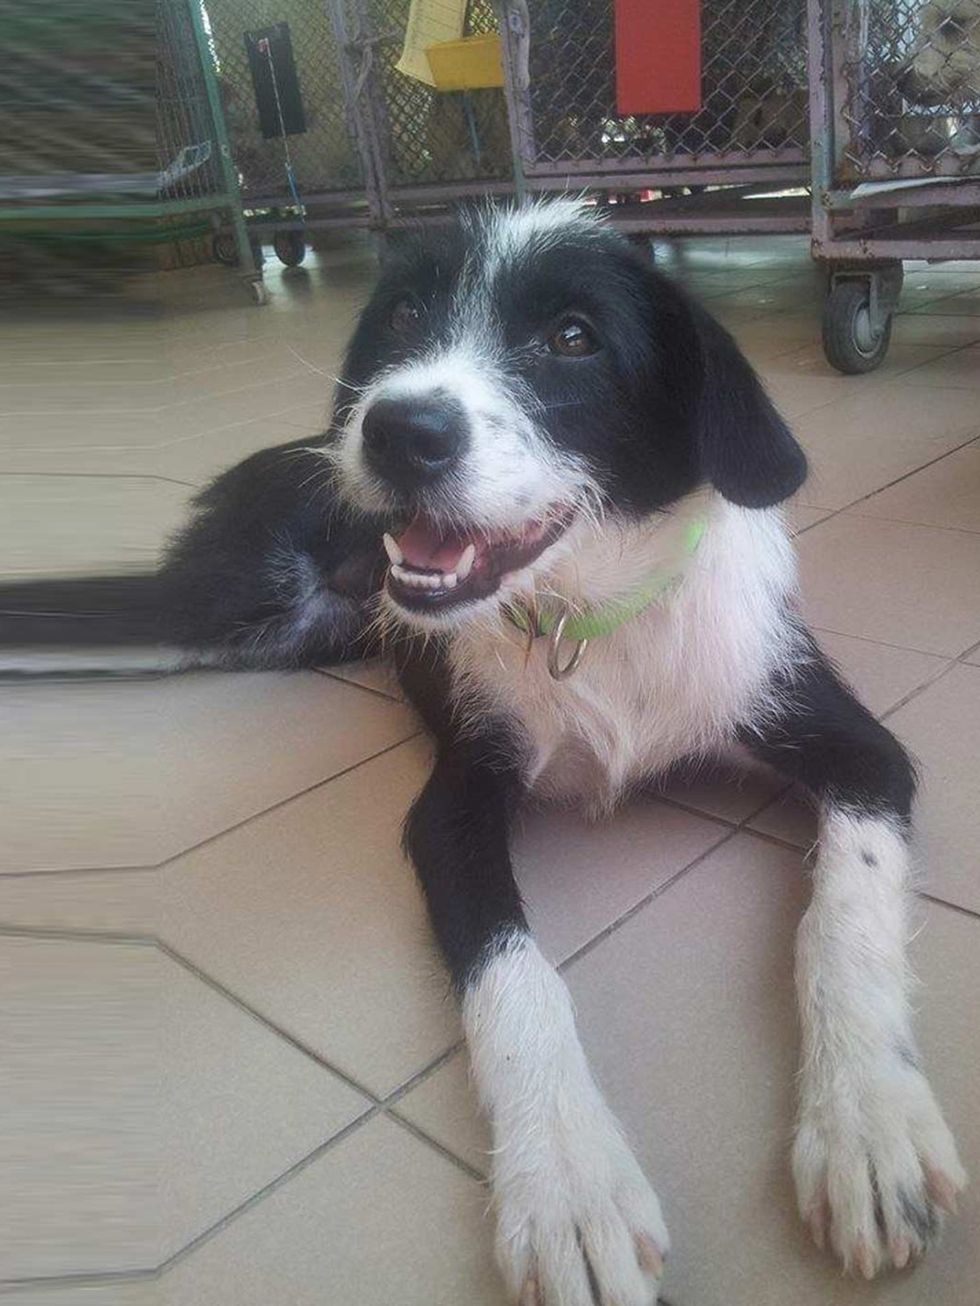 <p><strong>Name:</strong> Belle</p><p>A survivor of the dog meat trade and she was rescued from the Nakhon Phanom camp.</p><p>She is a lively, happy girl, full of energy and would make a great family pet. medium size, about 2 years old.</p><p>For adoption